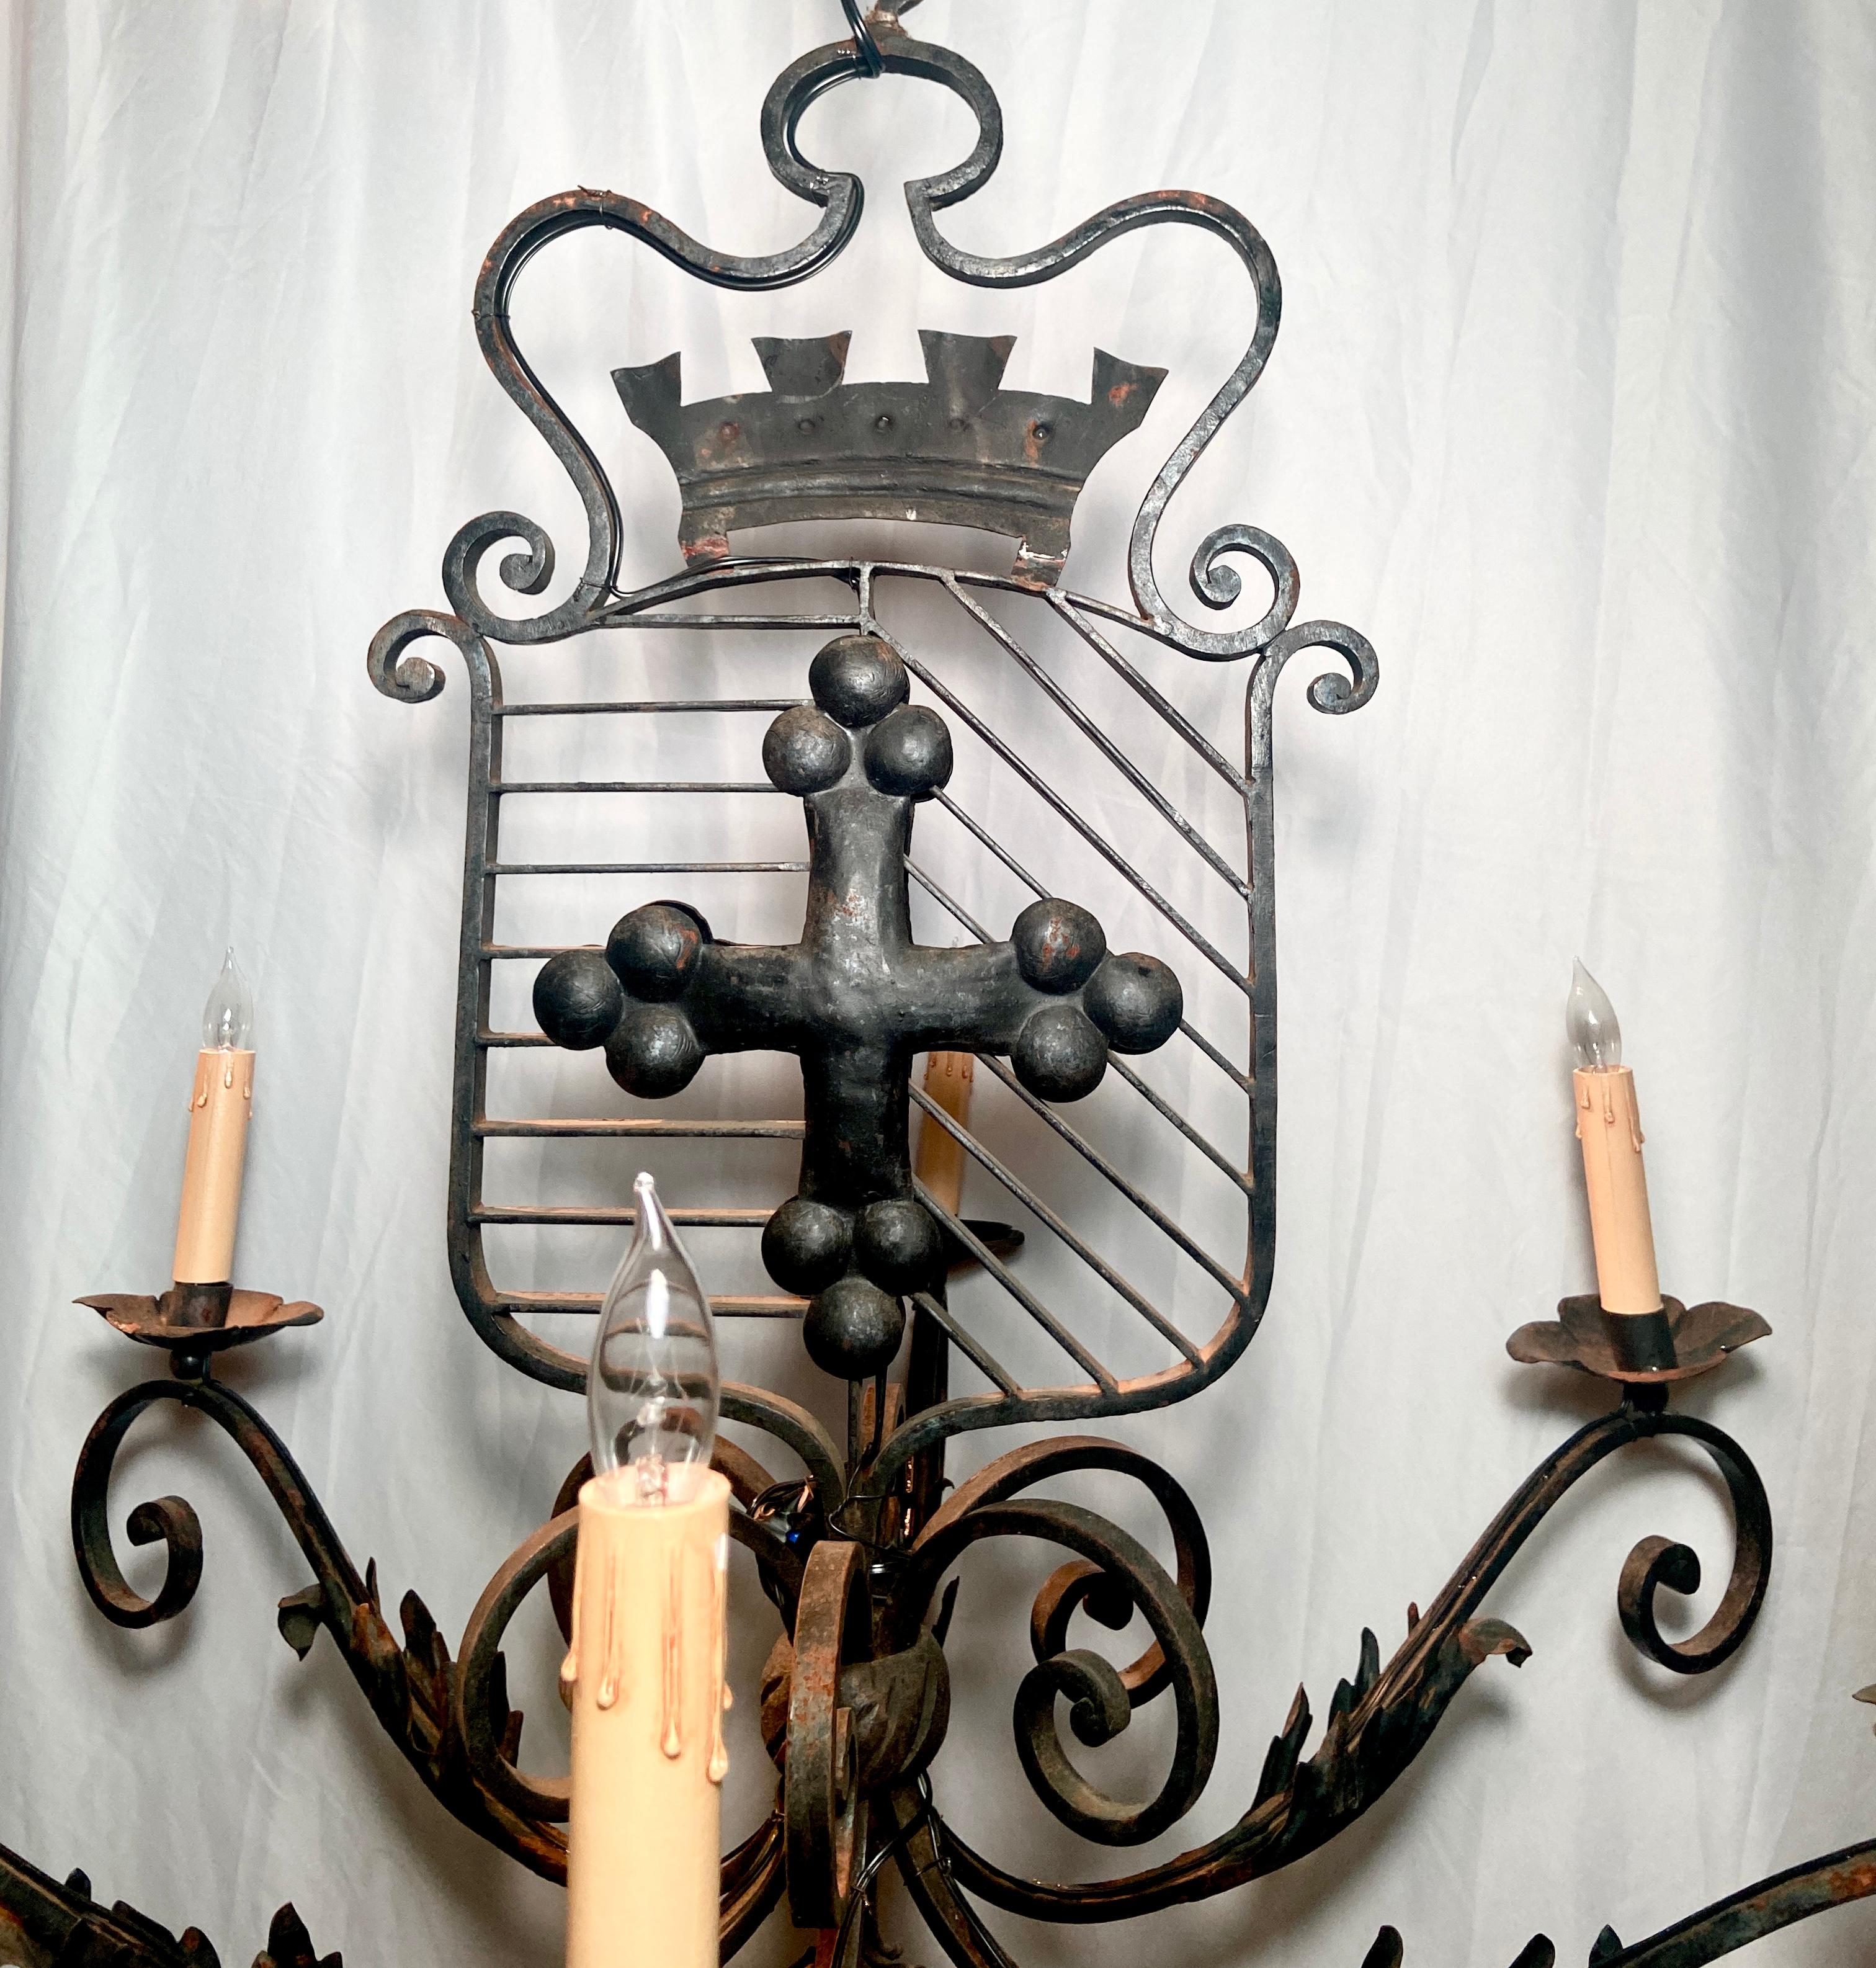 Antique 19th century French wrought iron 6 light chandelier.